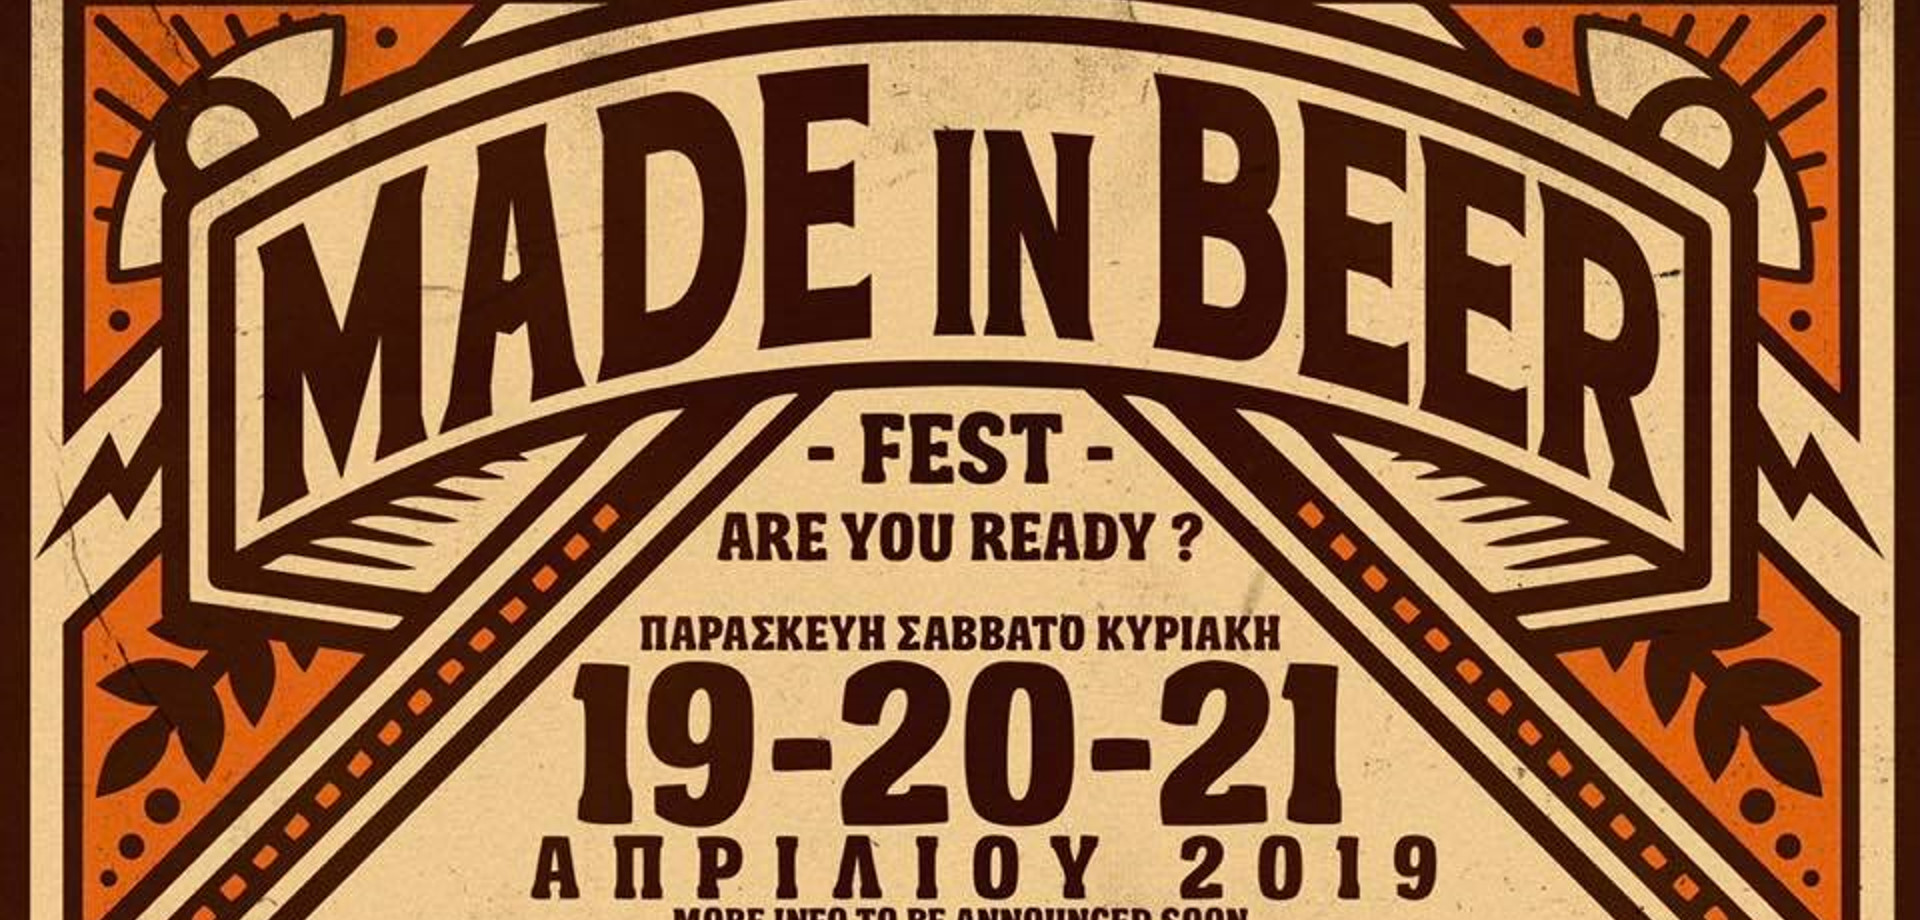 Made in Beer Festival 2019